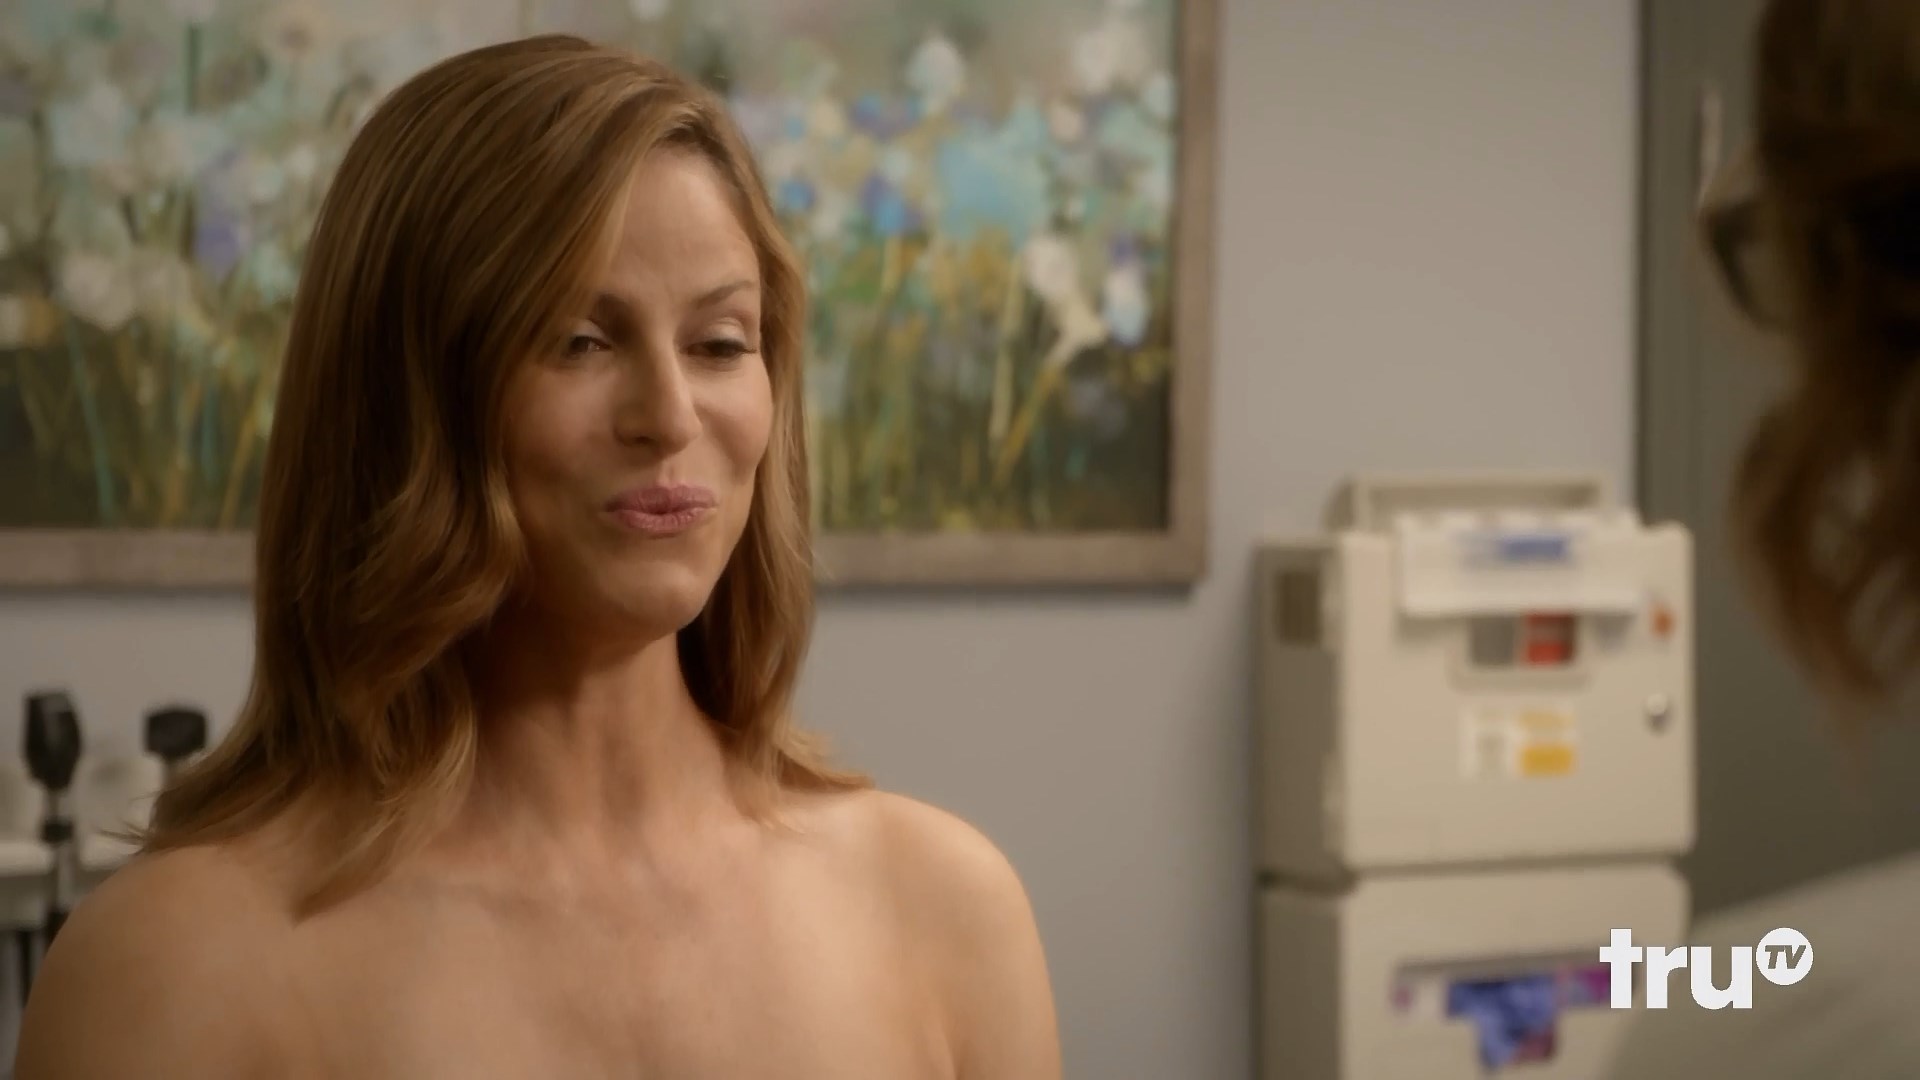 Andrea savage topless